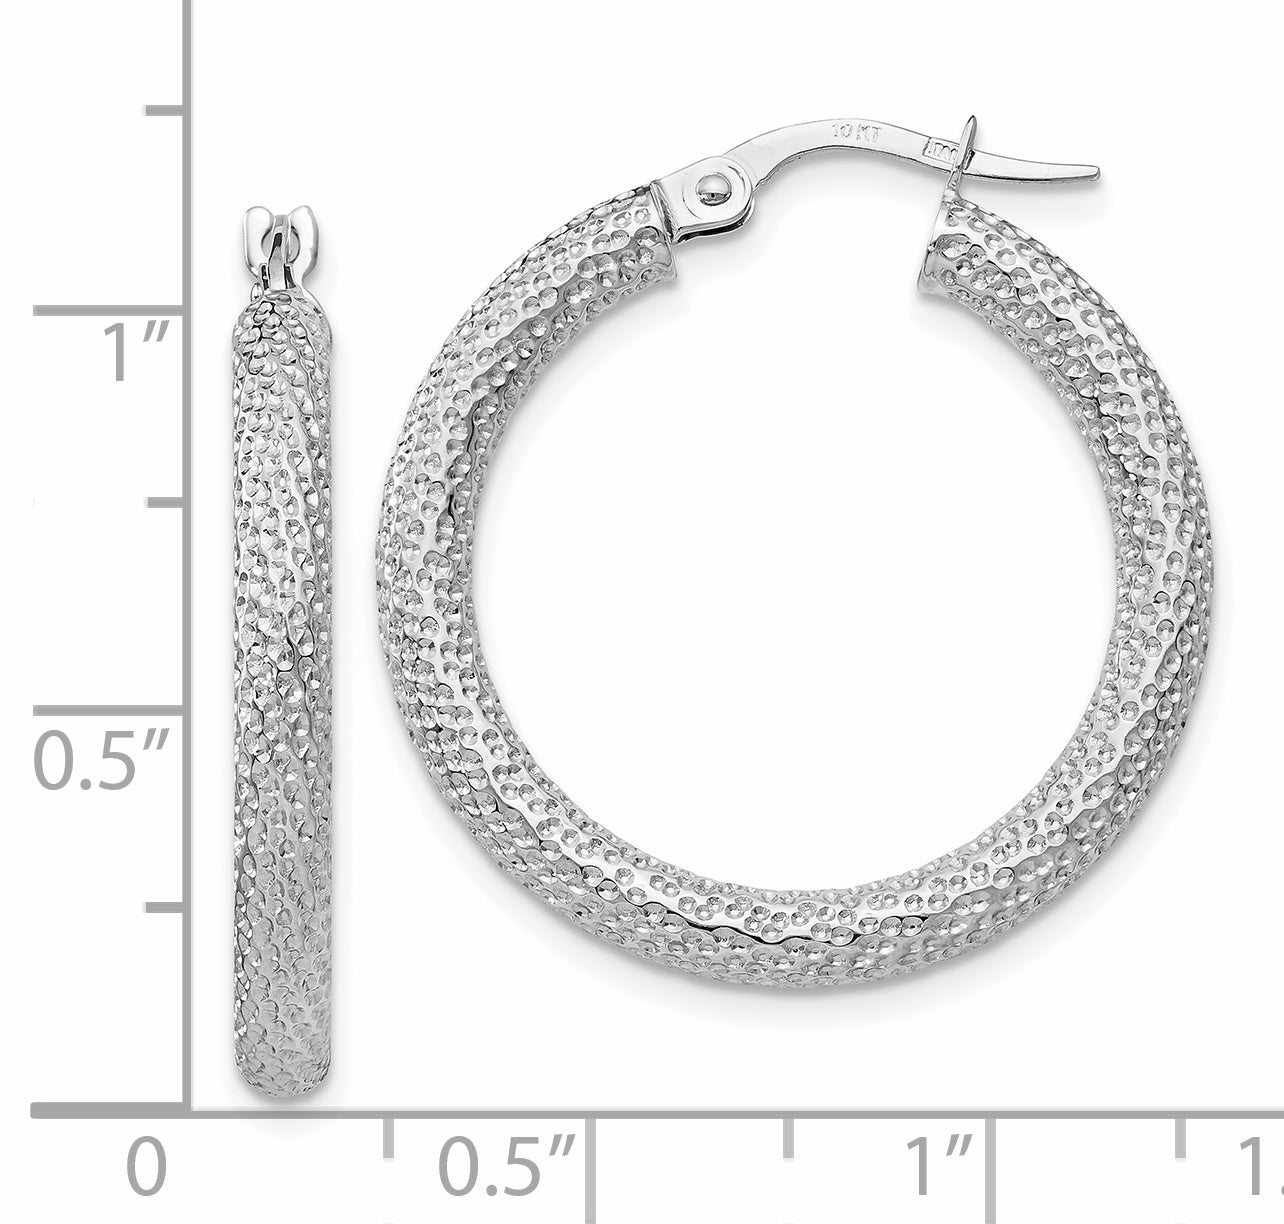 Leslie's 10K White Gold Polished and Textured Hinged Hoop Earrings